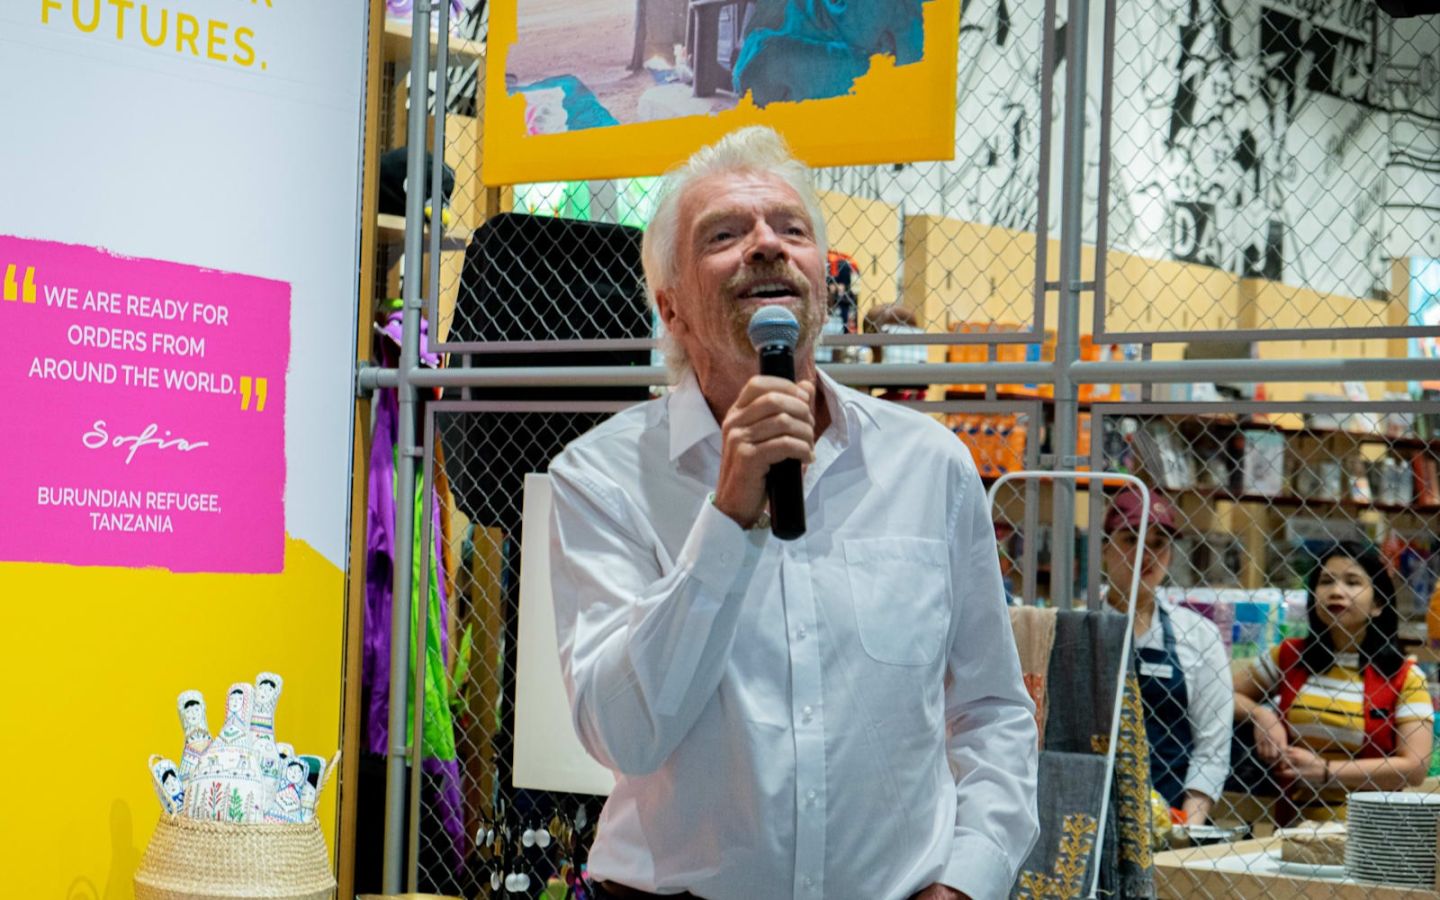 Richard Branson in white shirt holding a microphone and smiling